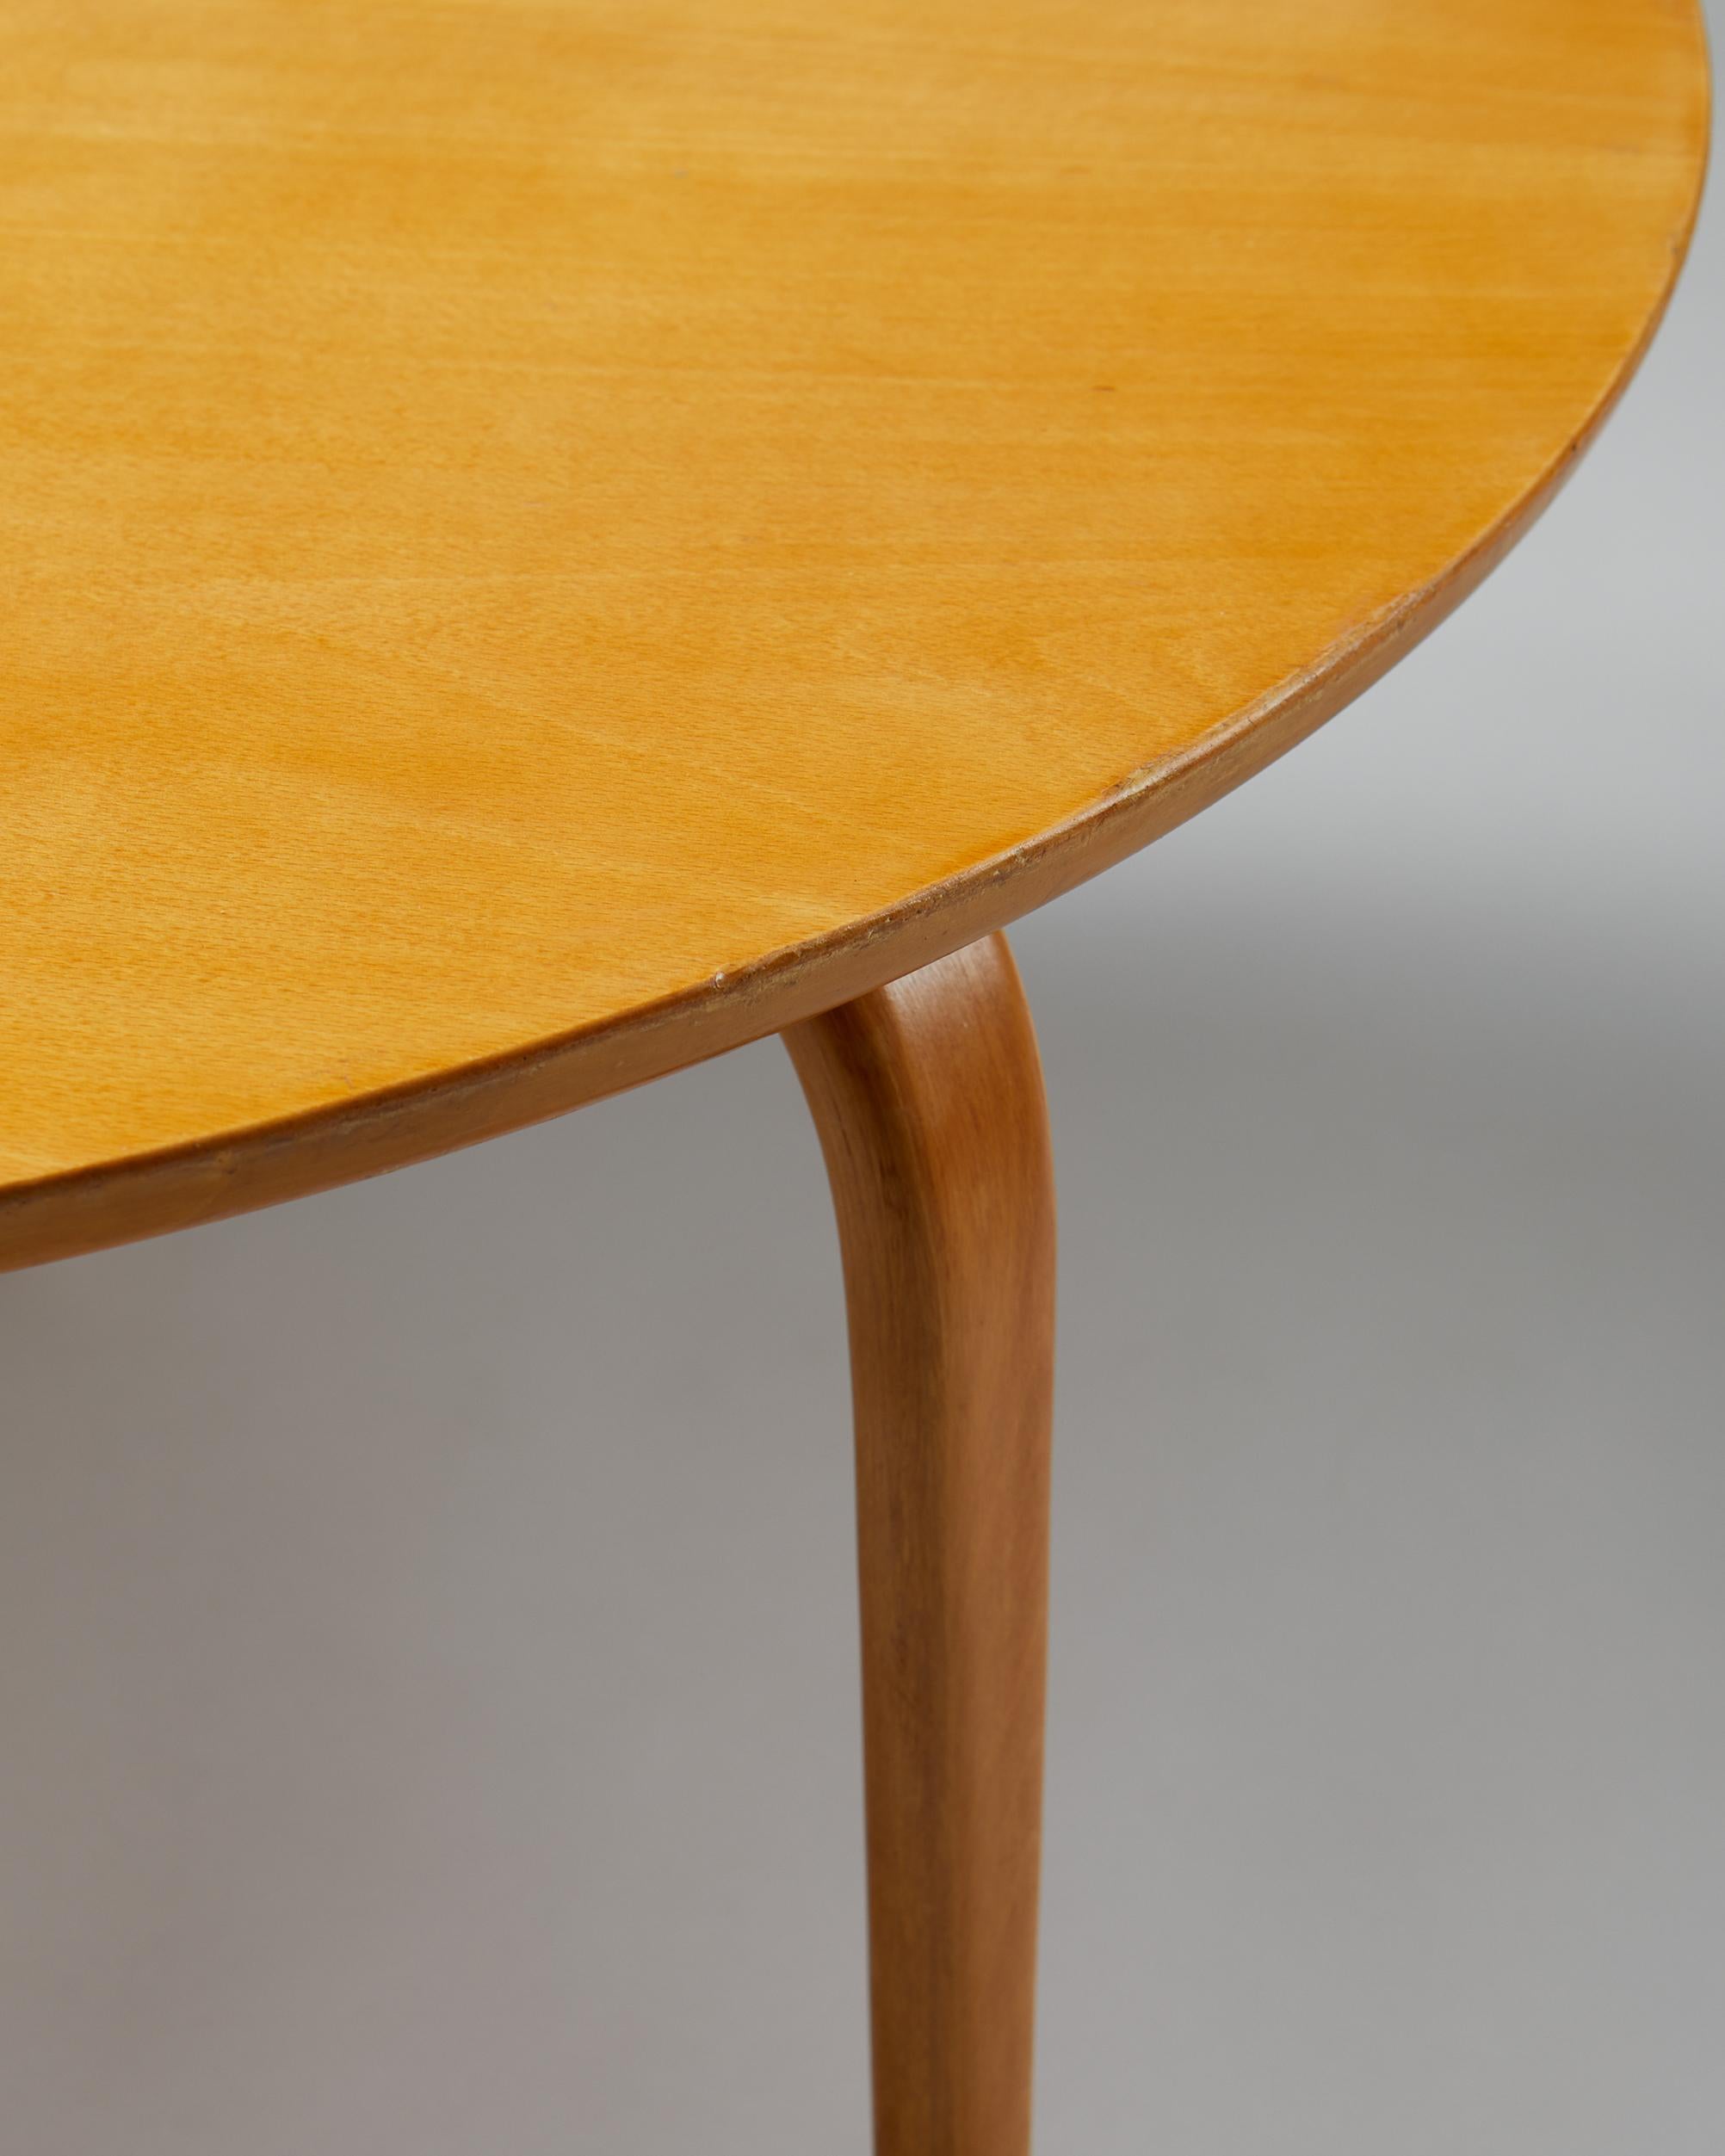 20th Century Occasional Table “Annika” Designed by Bruno Mathsson for Karl Mathsson, Sweden  For Sale